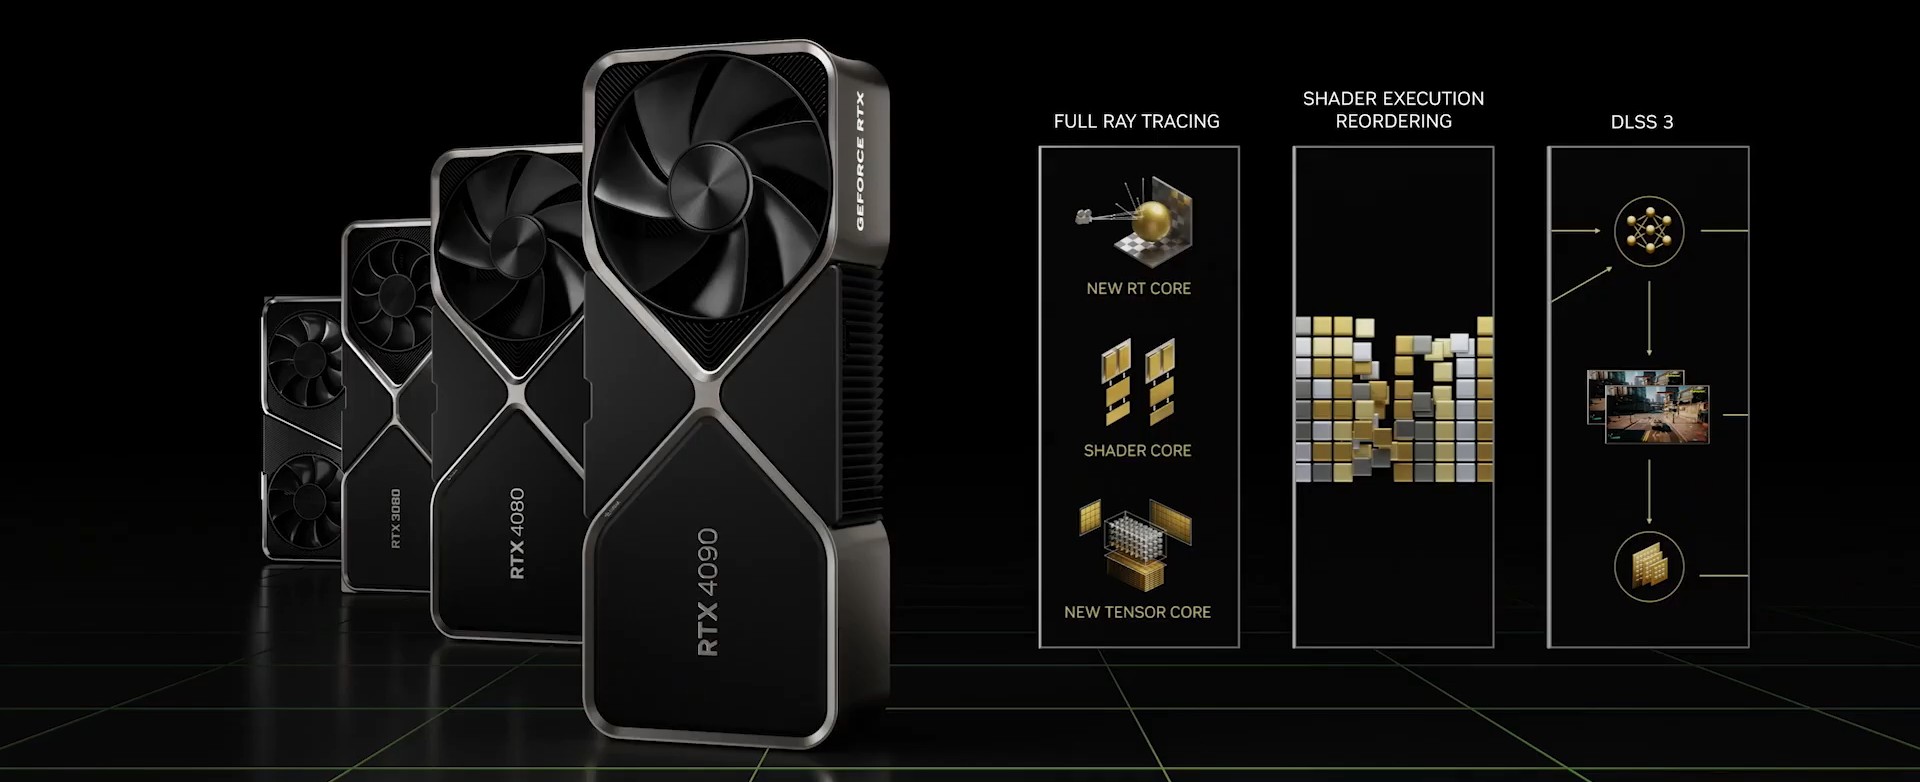 Nvidia RTX 4090 'the new heavyweight champ' launches October 12 for $1599